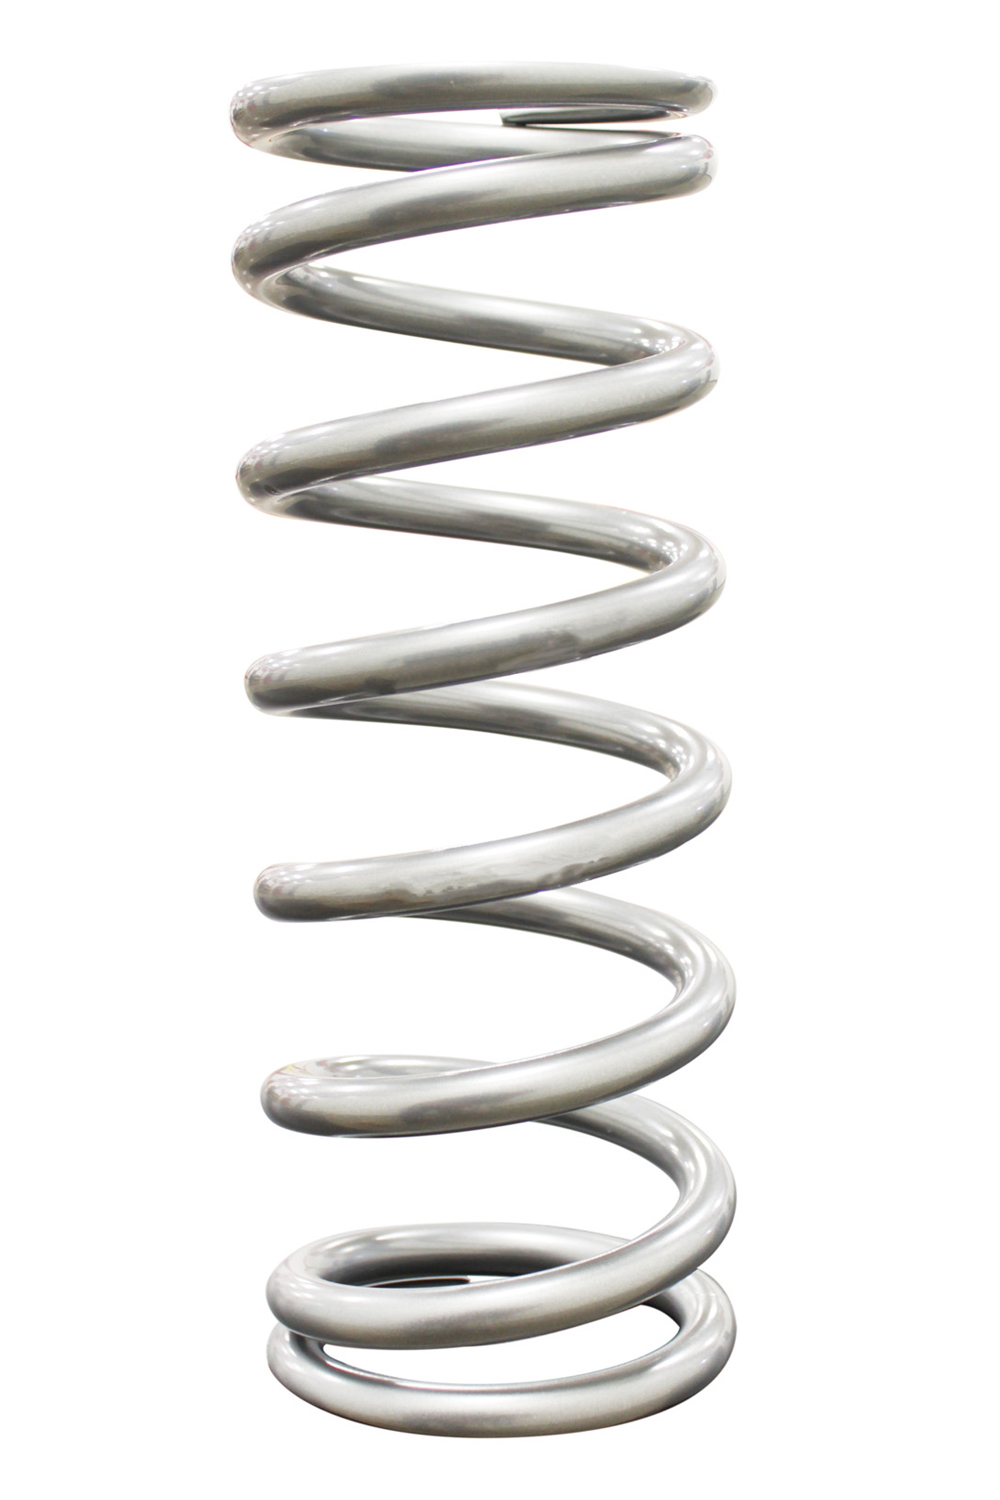 QA1 9HT180 Coil Spring, High Travel, Coil-Over, 2.500 in ID, 9.000 in Length, 180 lb/in Spring Rate, Steel, Silver Powder Coat, Each